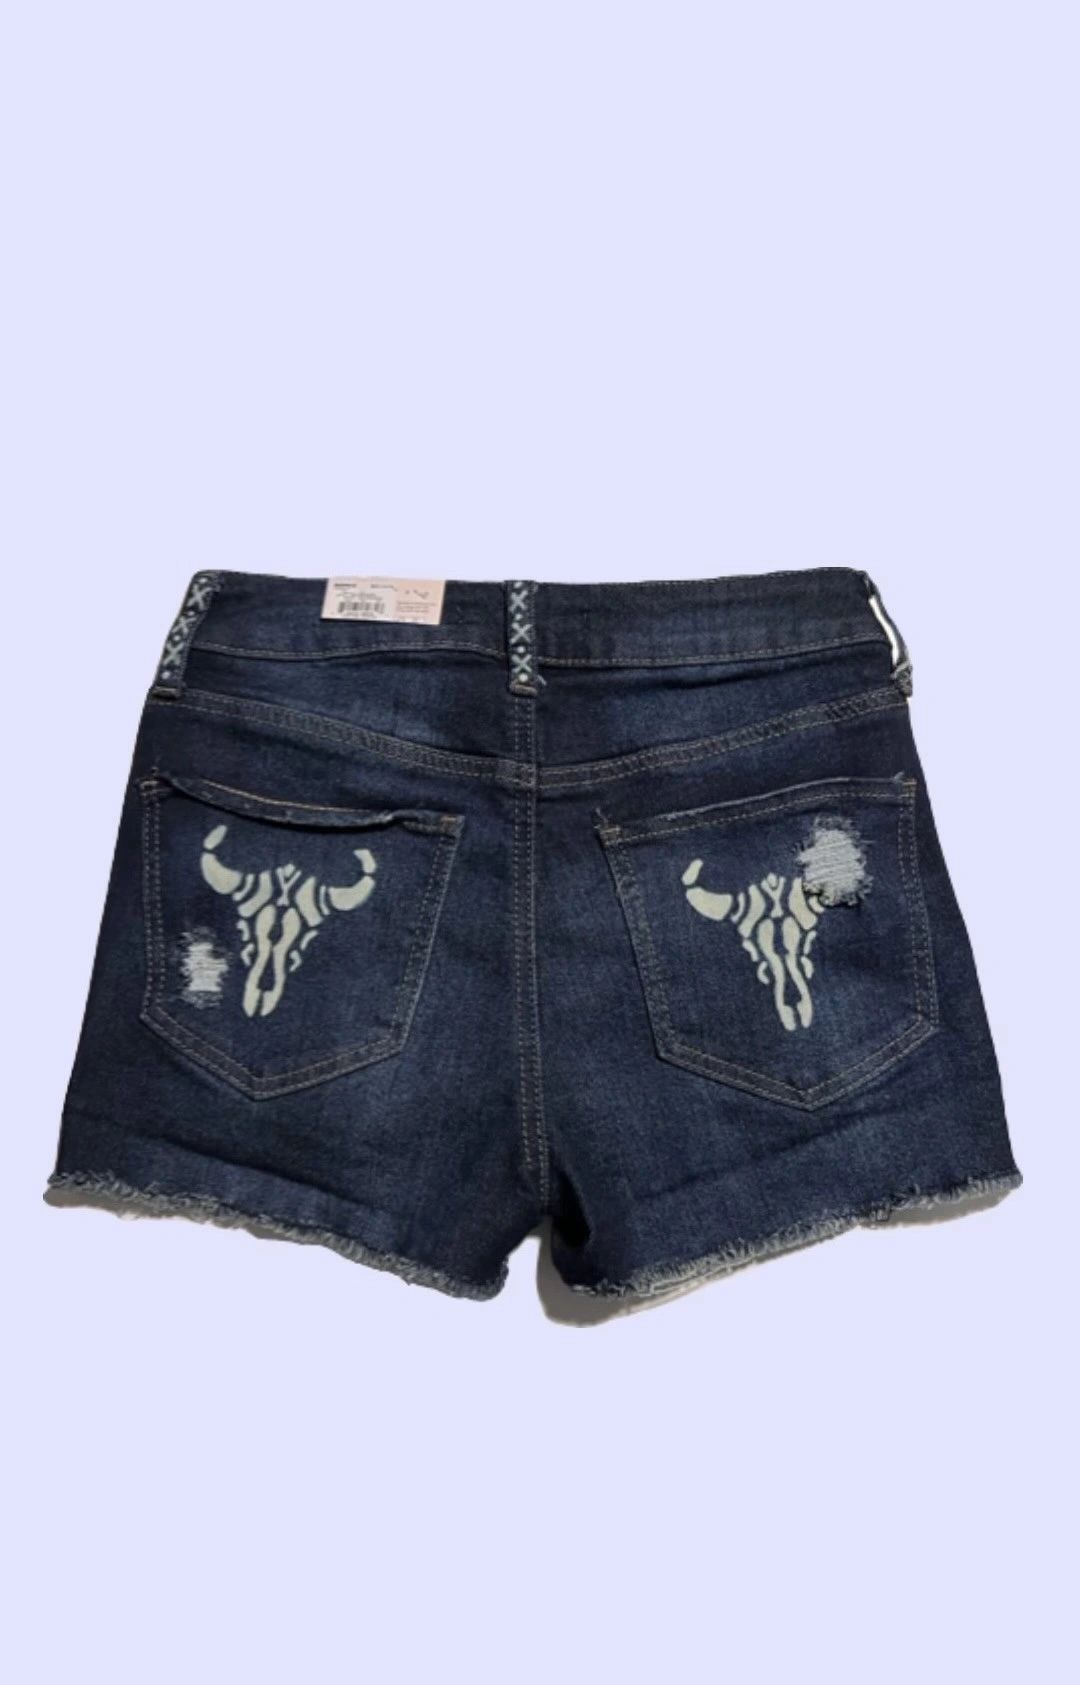 Steer Clear Shortie Short ~ So Hand-Bleached Longhorn Distressed Short ~ Size 5/27 W